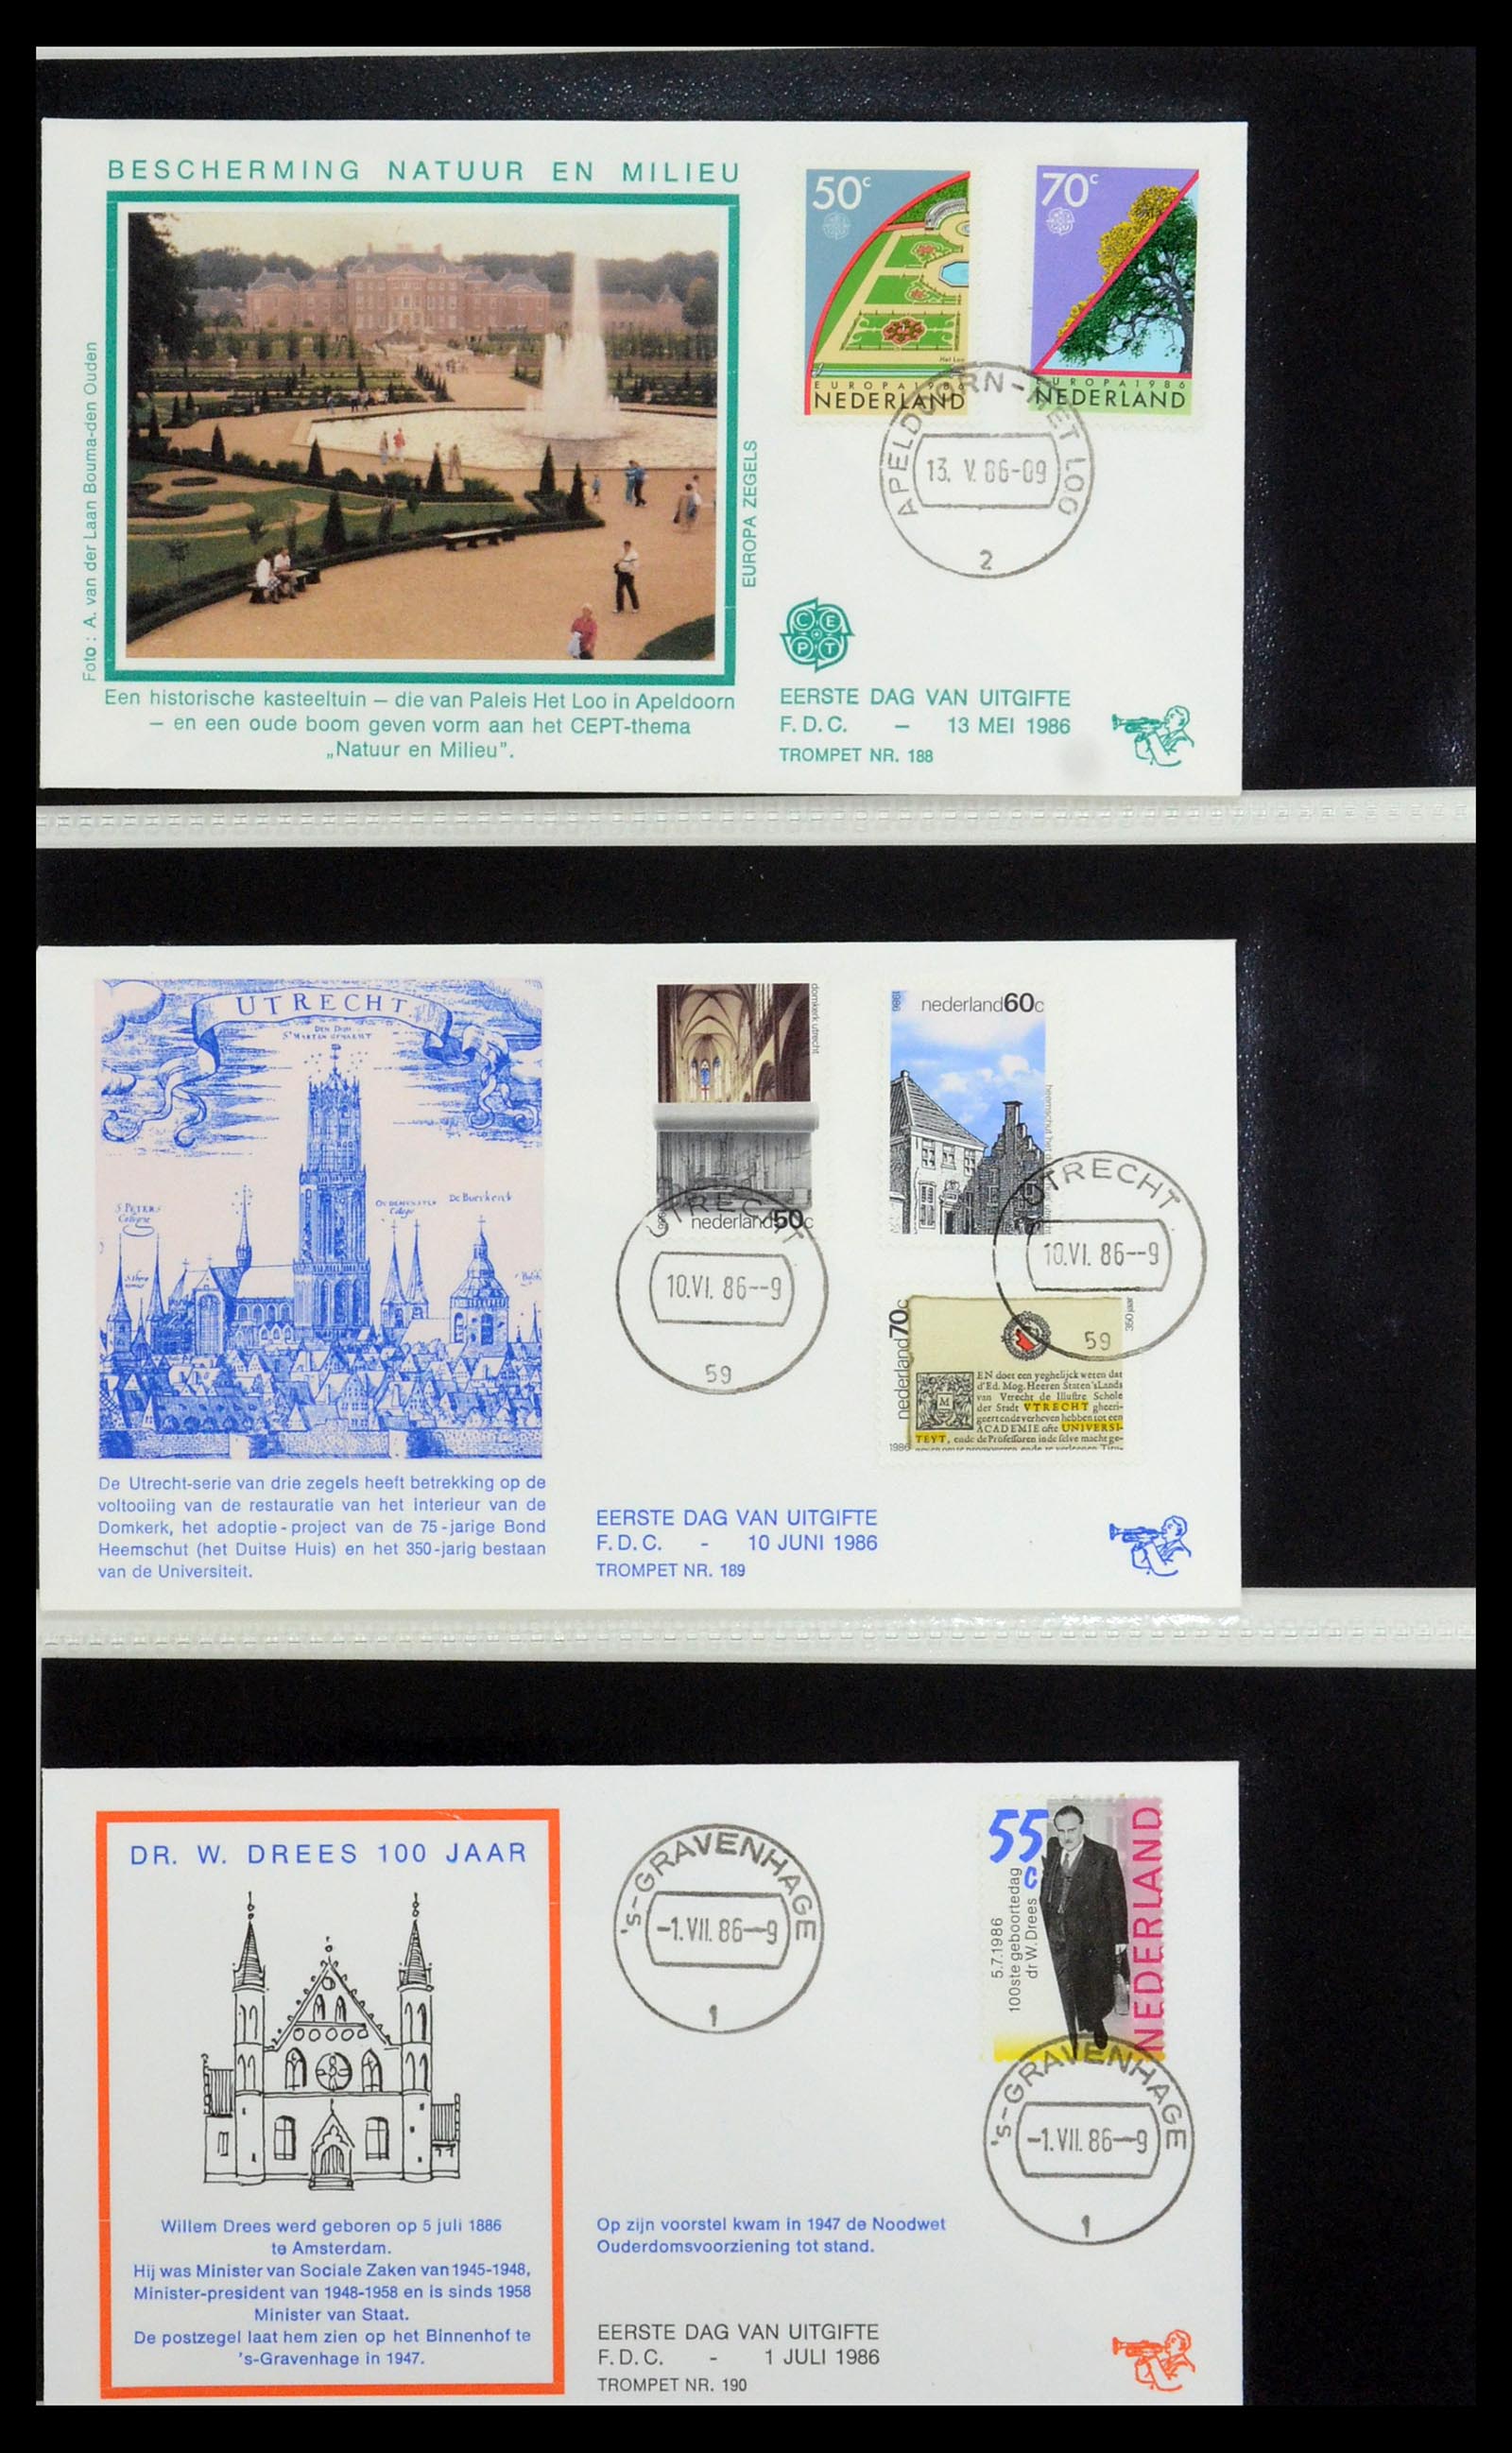 36342 072 - Stamp collection 36342 Netherlands Tromp FDC's 1968-1987.